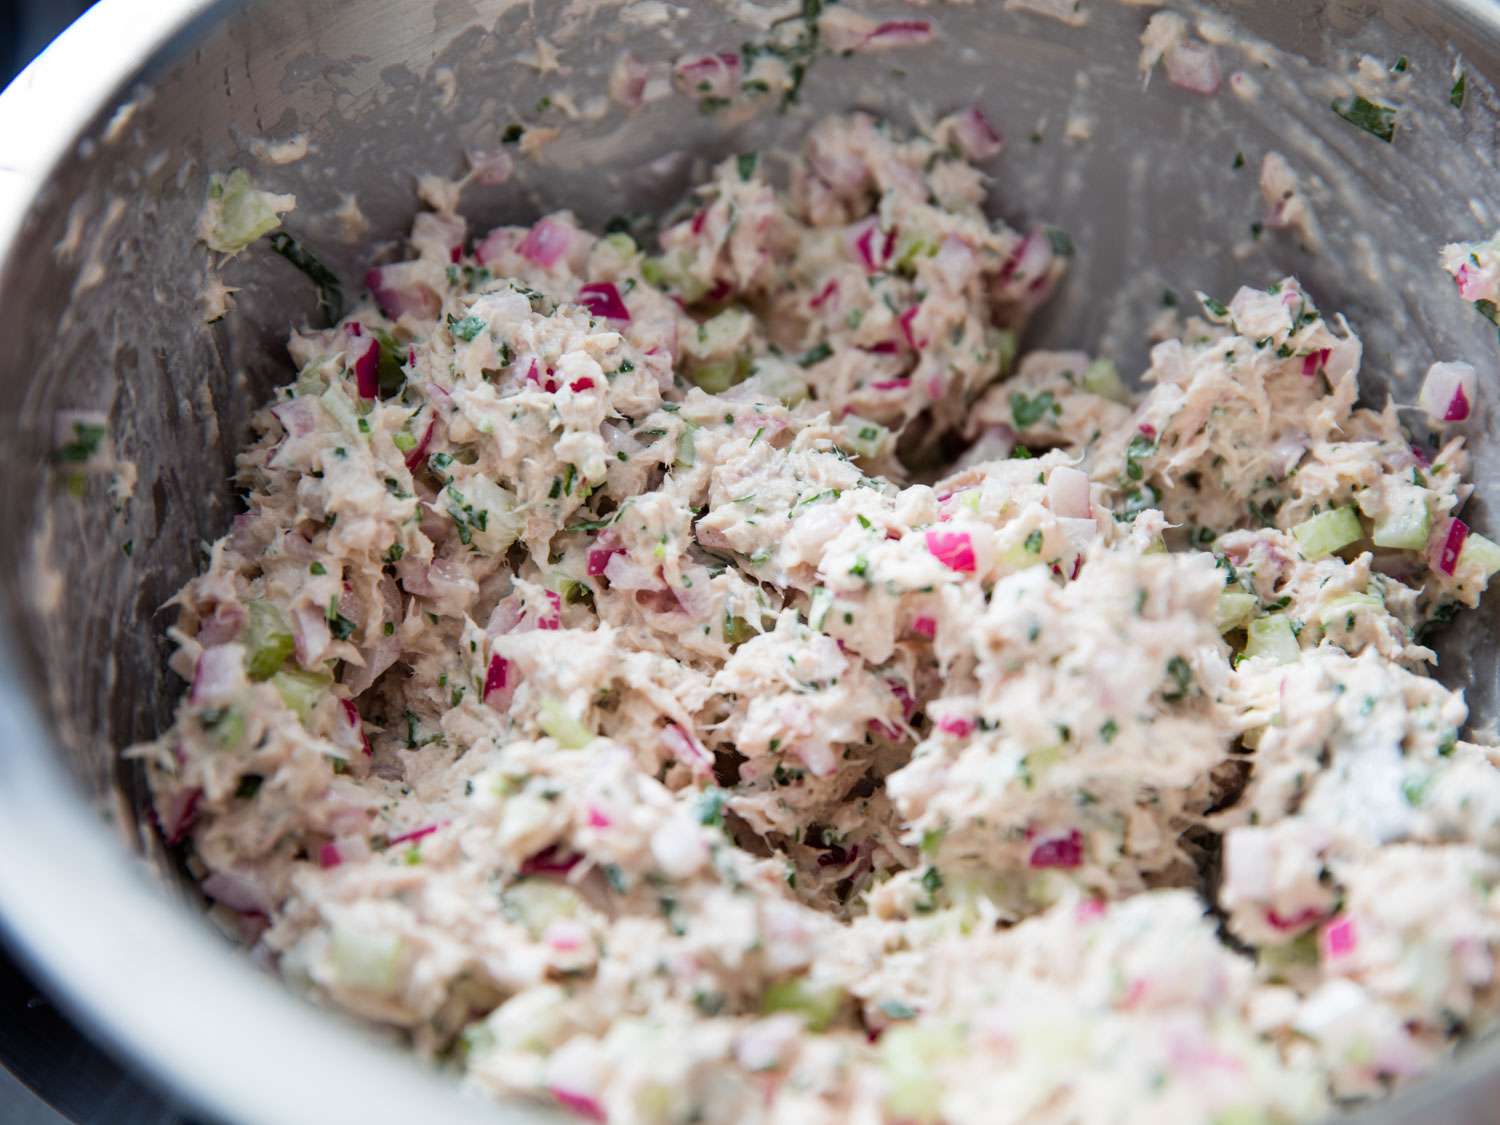 Close-up of the finished tuna salad in a mixing bowl.